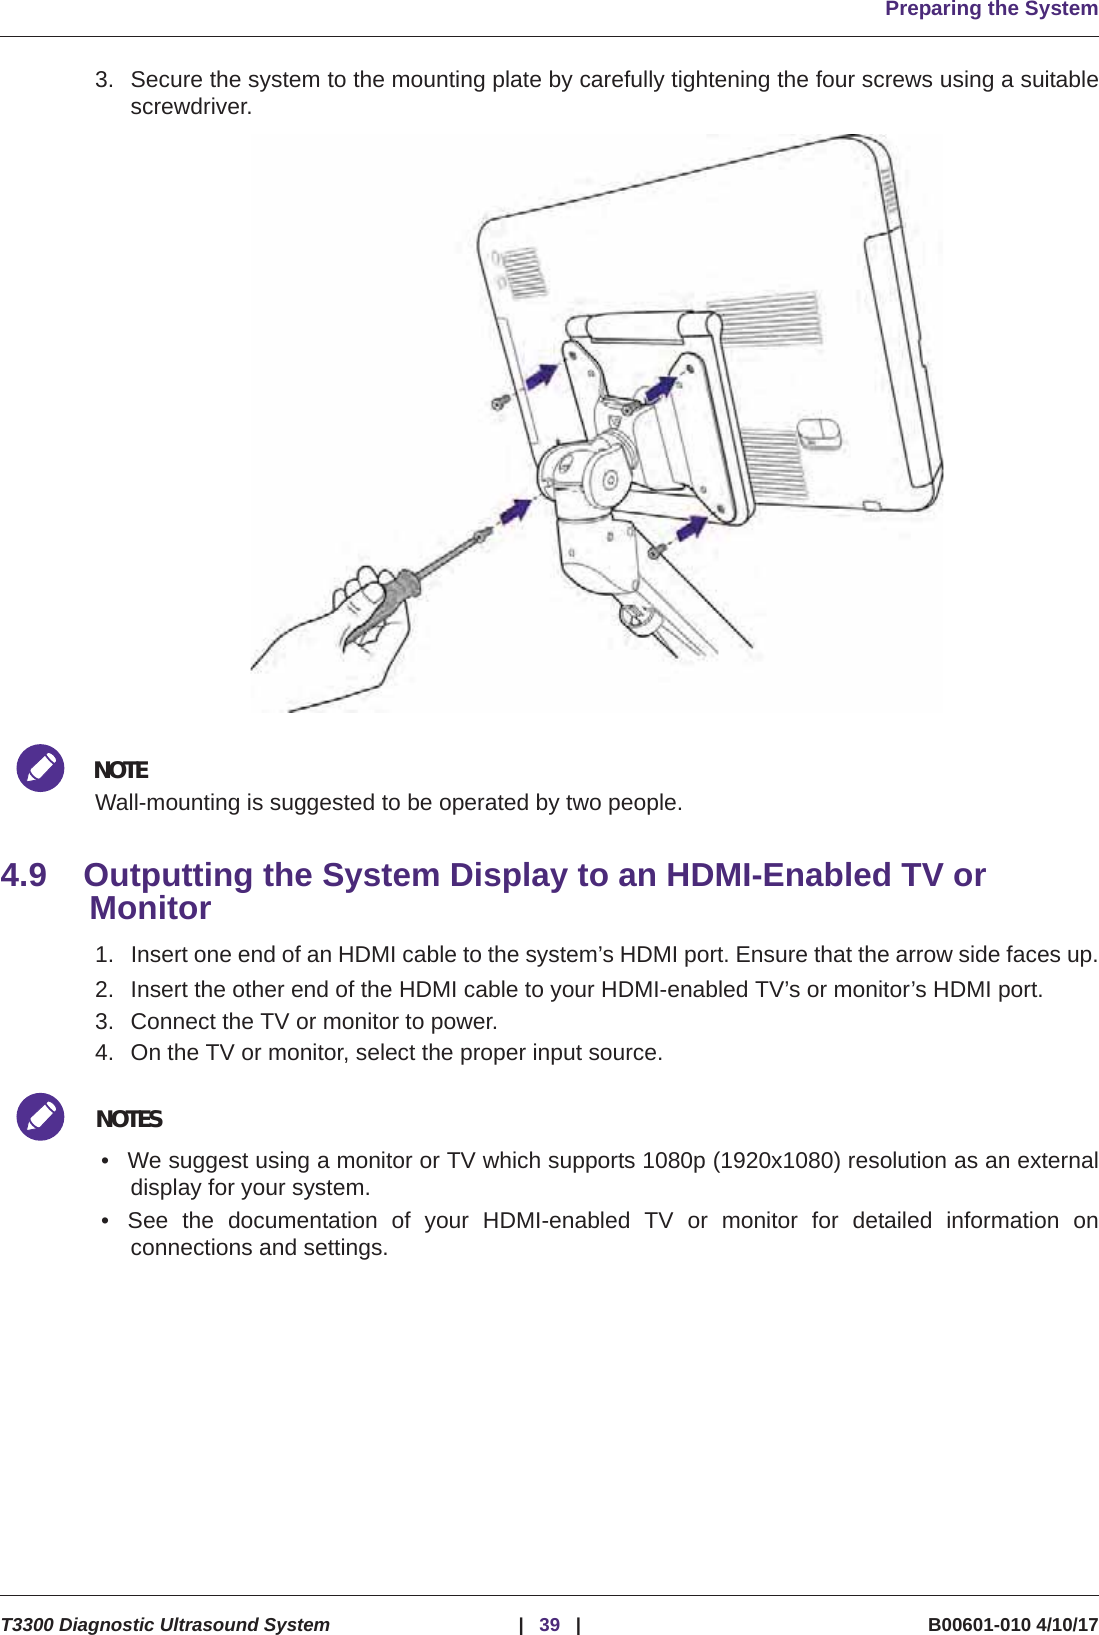 Preparing the SystemT3300 Diagnostic Ultrasound System |39 | B00601-010 4/10/173. Secure the system to the mounting plate by carefully tightening the four screws using a suitablescrewdriver. NOTEWall-mounting is suggested to be operated by two people.4.9 Outputting the System Display to an HDMI-Enabled TV or Monitor1. Insert one end of an HDMI cable to the system’s HDMI port. Ensure that the arrow side faces up.2. Insert the other end of the HDMI cable to your HDMI-enabled TV’s or monitor’s HDMI port.3. Connect the TV or monitor to power.4. On the TV or monitor, select the proper input source.NOTES• We suggest using a monitor or TV which supports 1080p (1920x1080) resolution as an externaldisplay for your system.• See the documentation of your HDMI-enabled TV or monitor for detailed information onconnections and settings.